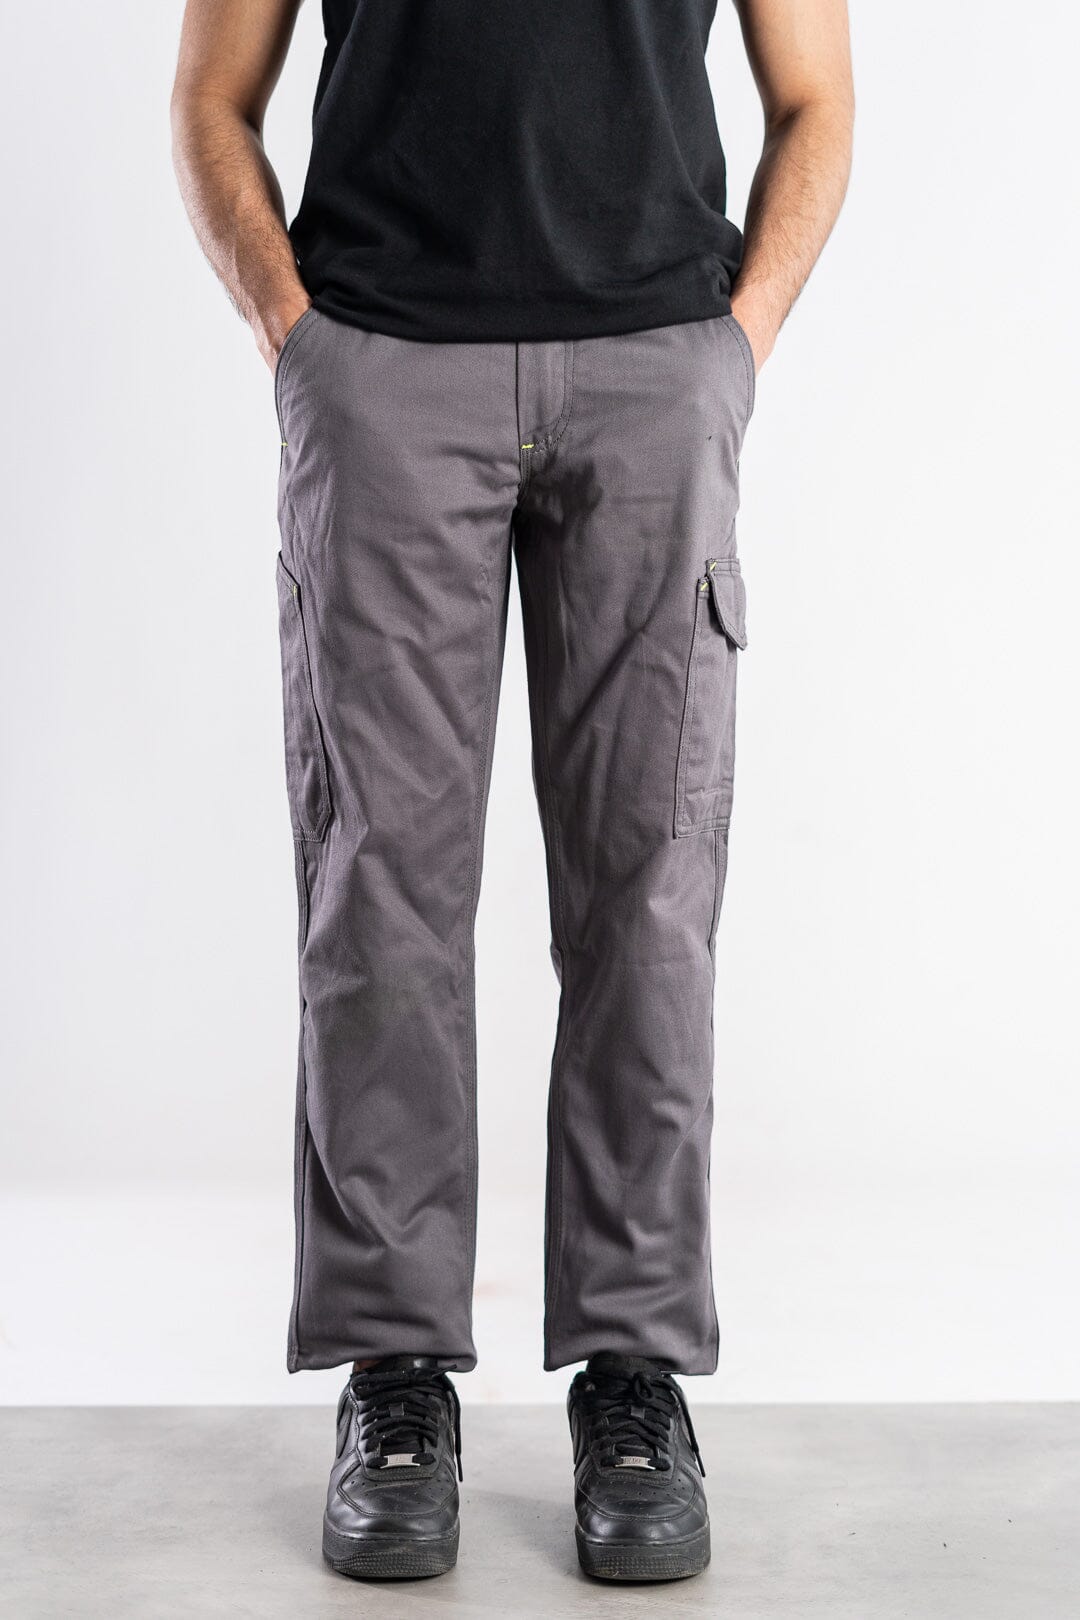 Buy Tommy Hilfiger Men Grey Mid Rise Textured Formal Trousers - NNNOW.com